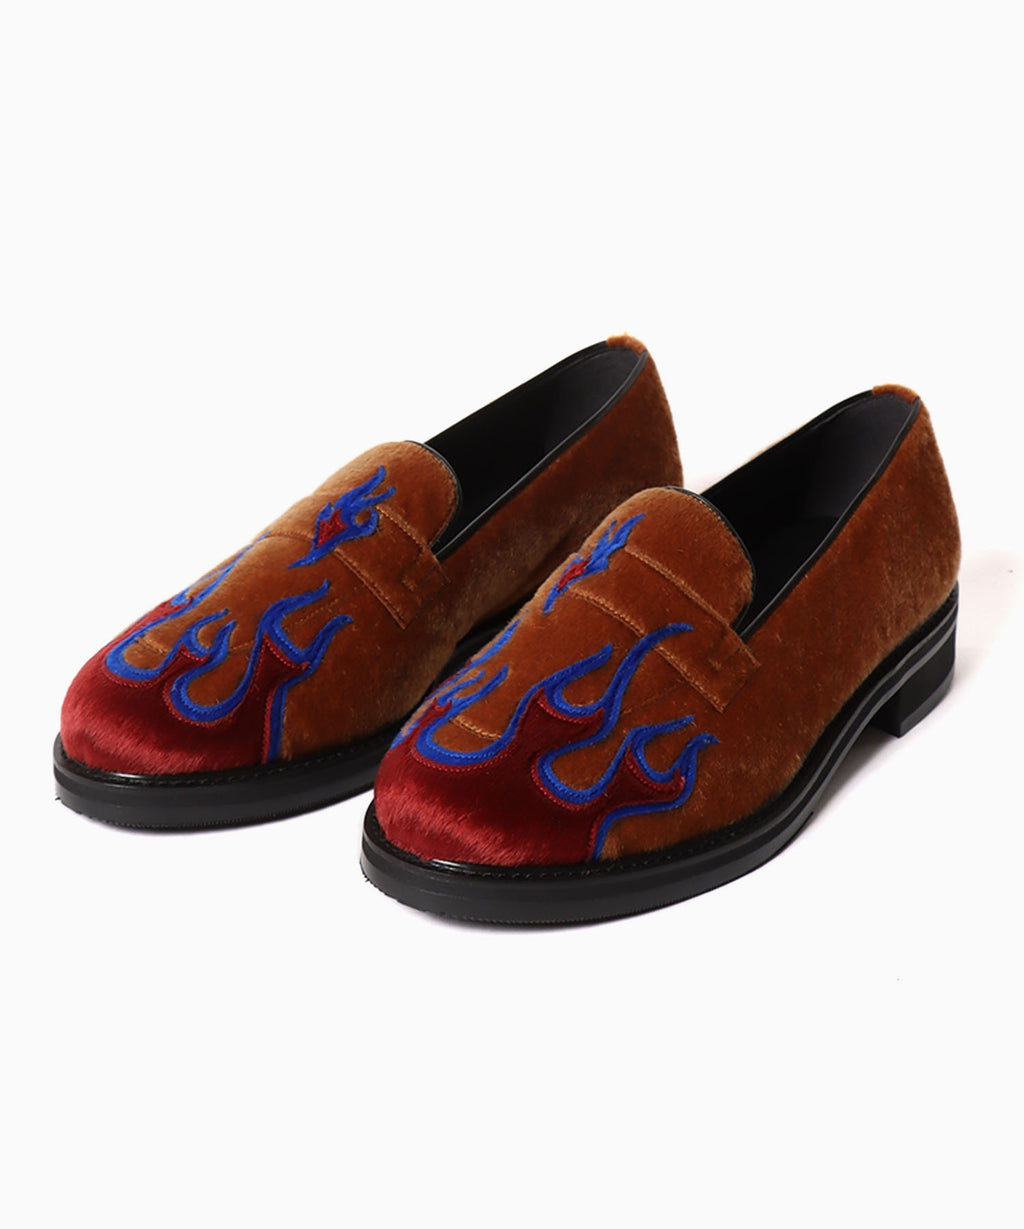 TENDER PERSON/テンダーパーソン FLAME PATTERN LOAFER ローファー-